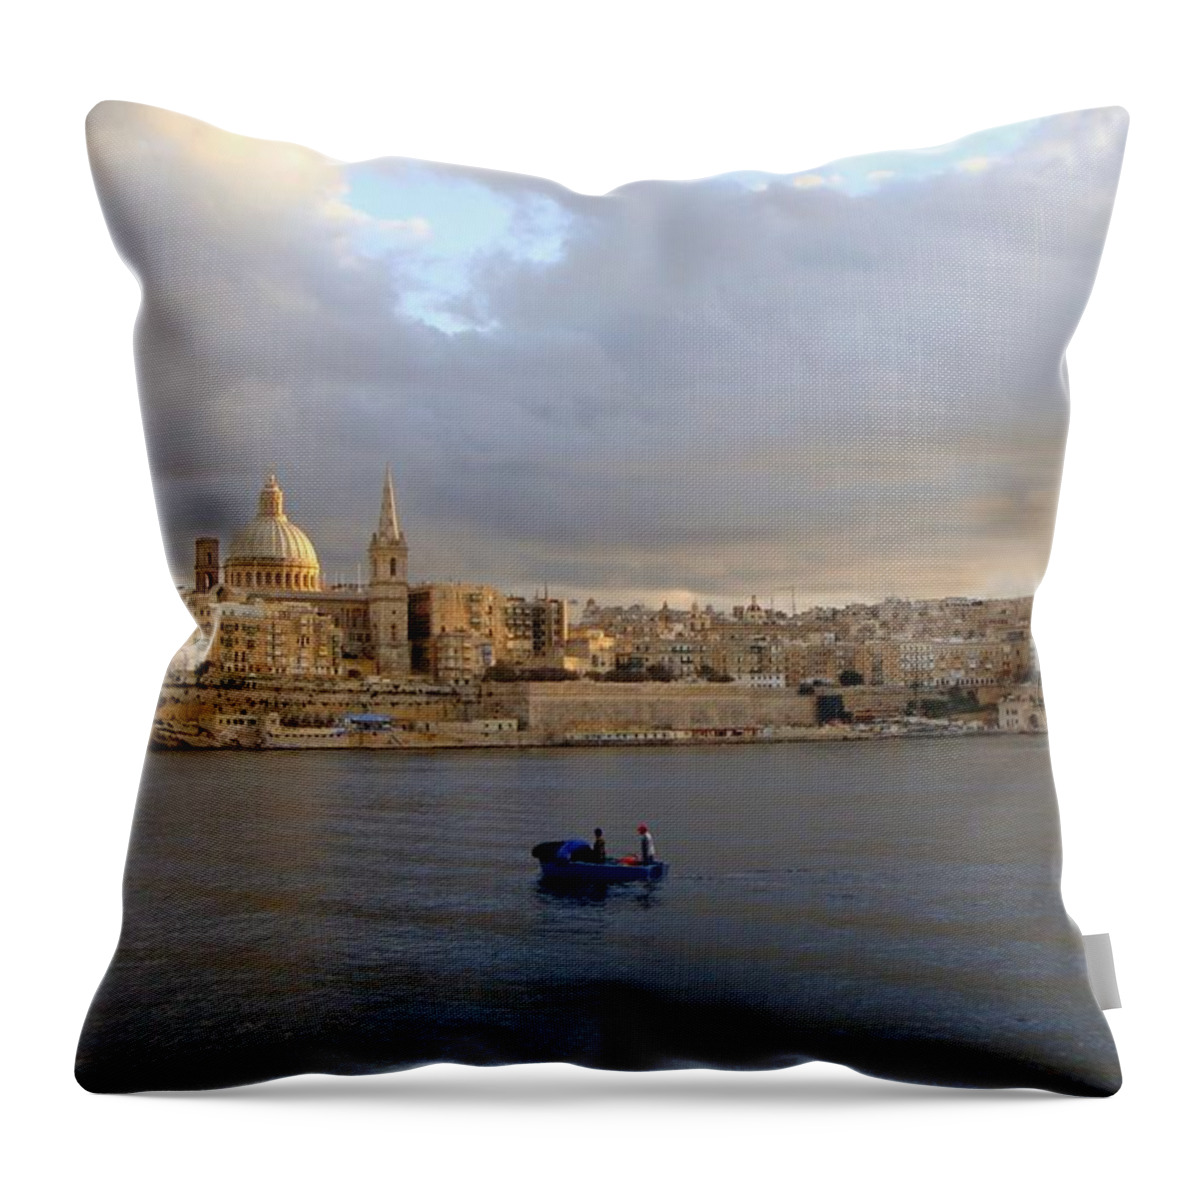 Wooden Throw Pillow featuring the photograph Colorful Wooden Boat in Historic Malta Marsamxett Harbor by Jeff at JSJ Photography